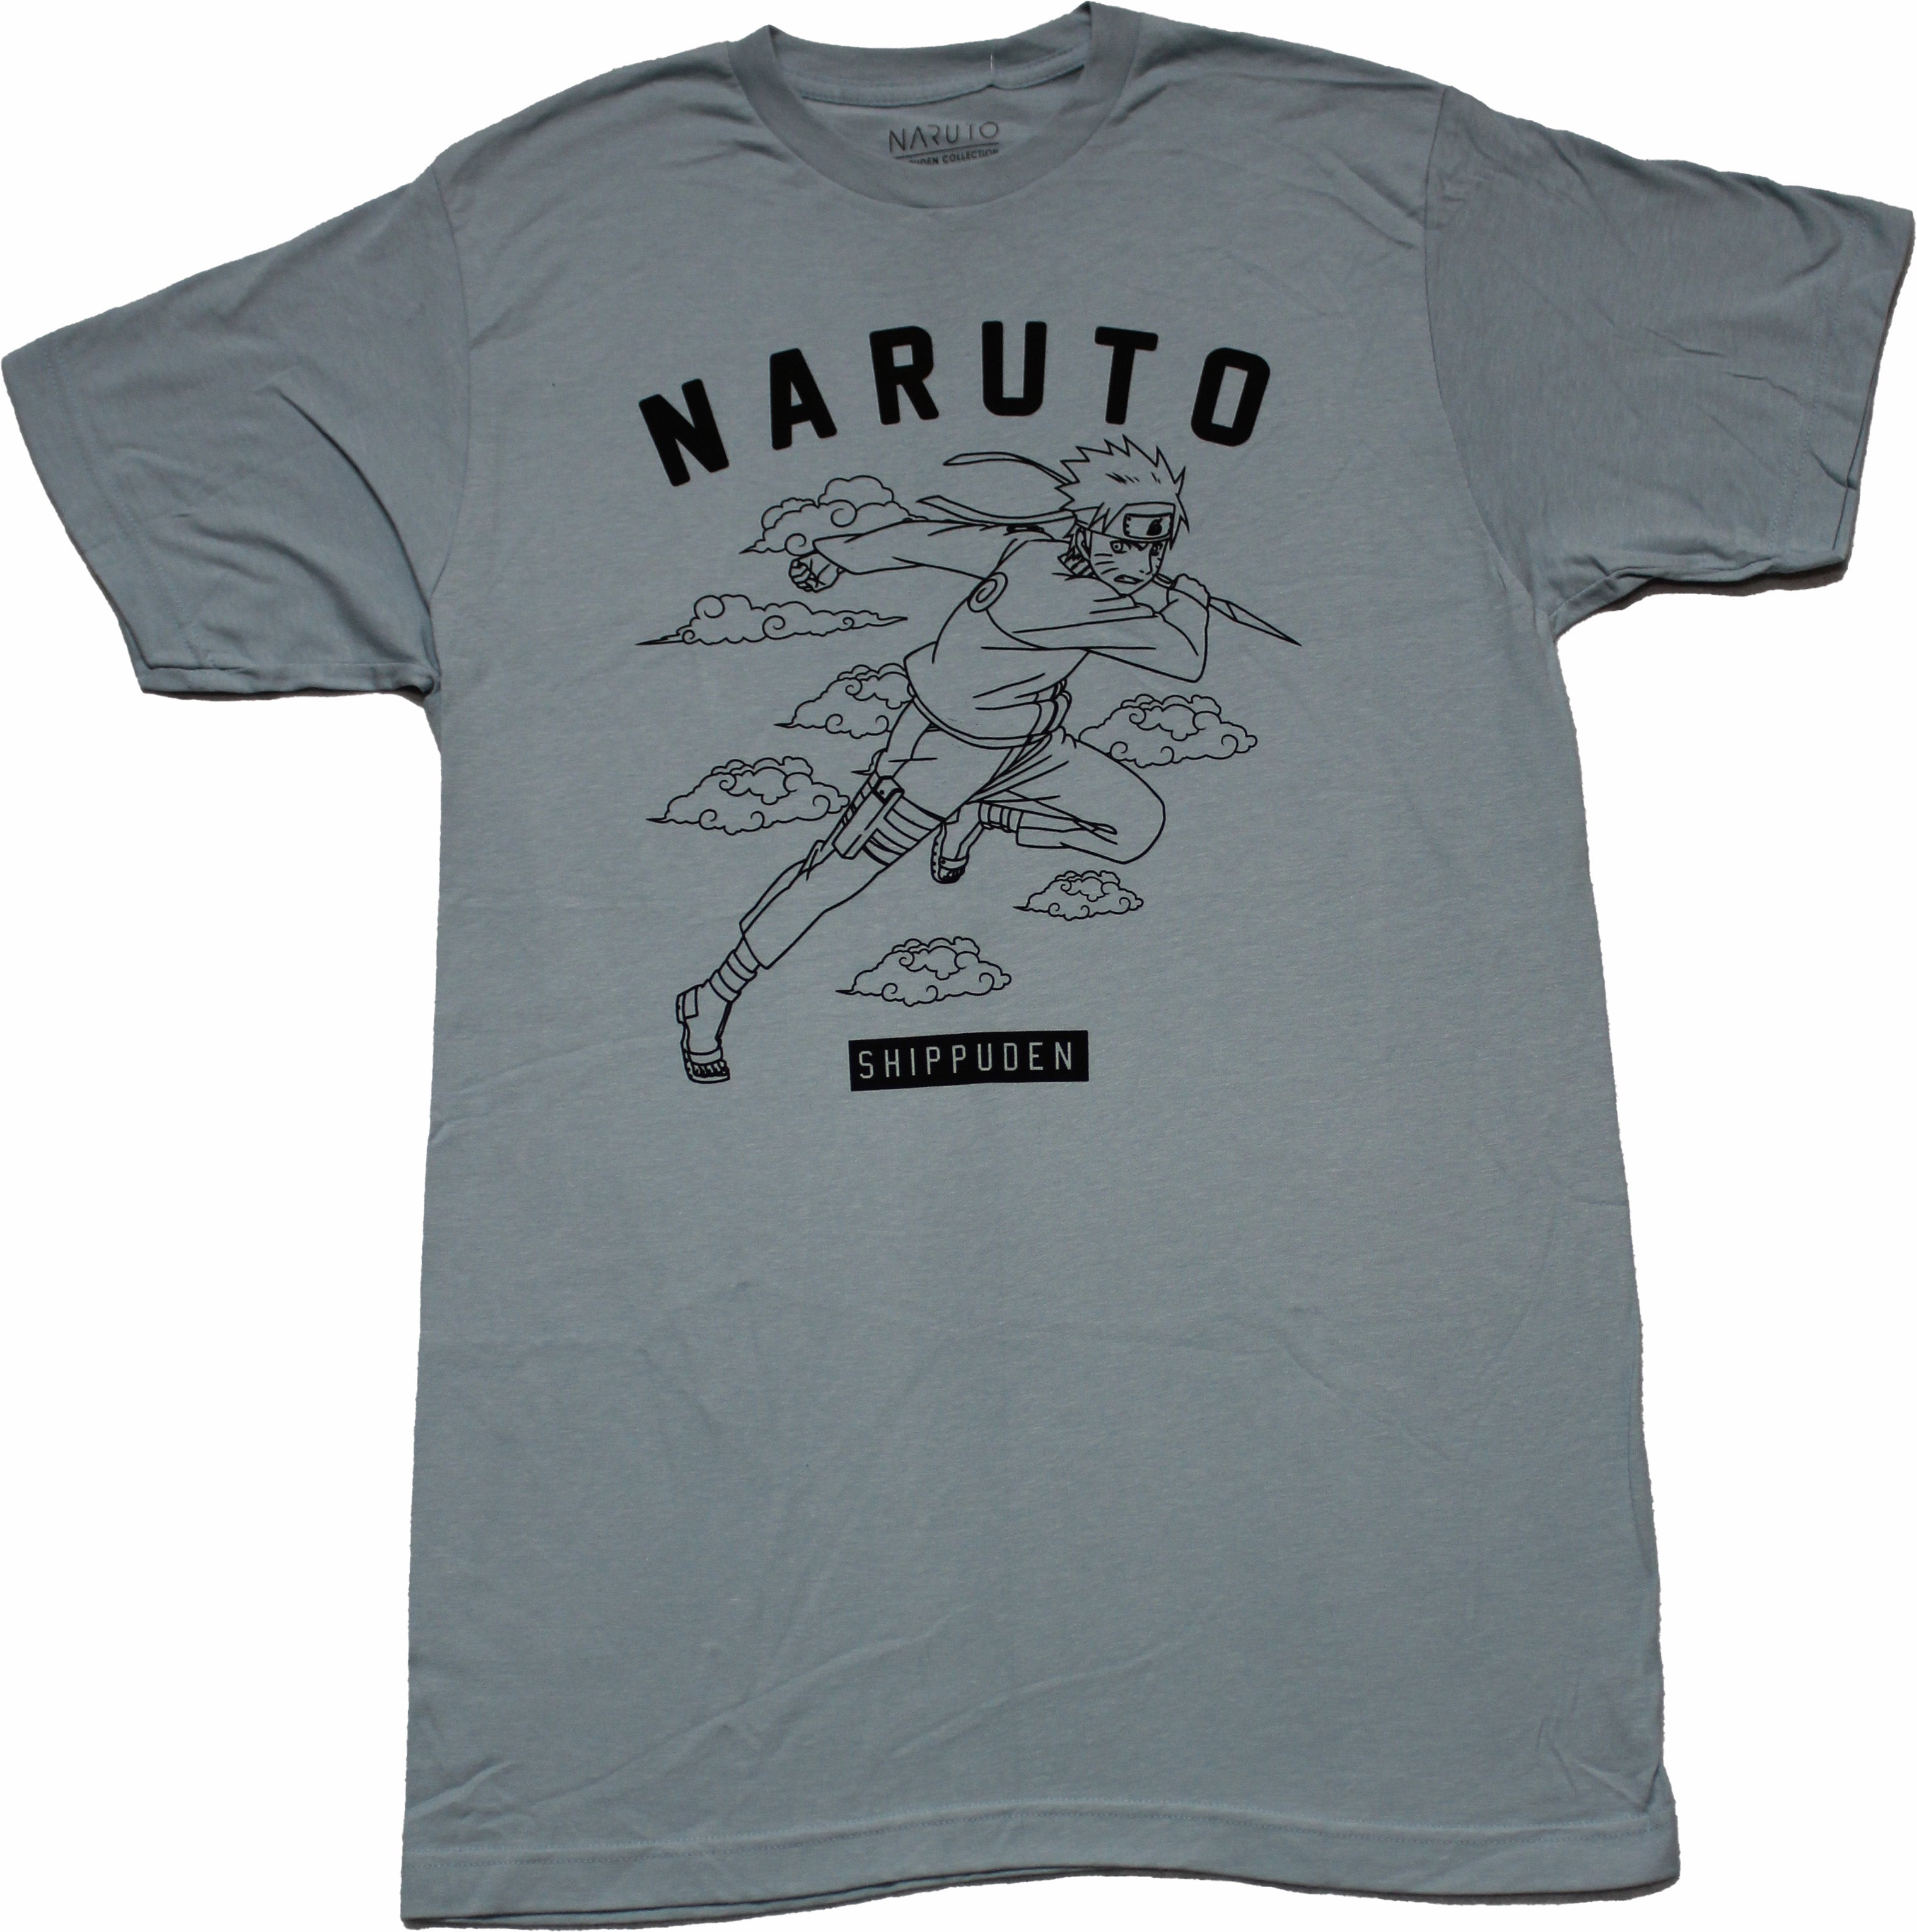 Naruto Shippuden Mens T-Shirt - Running Outline Clouds Image